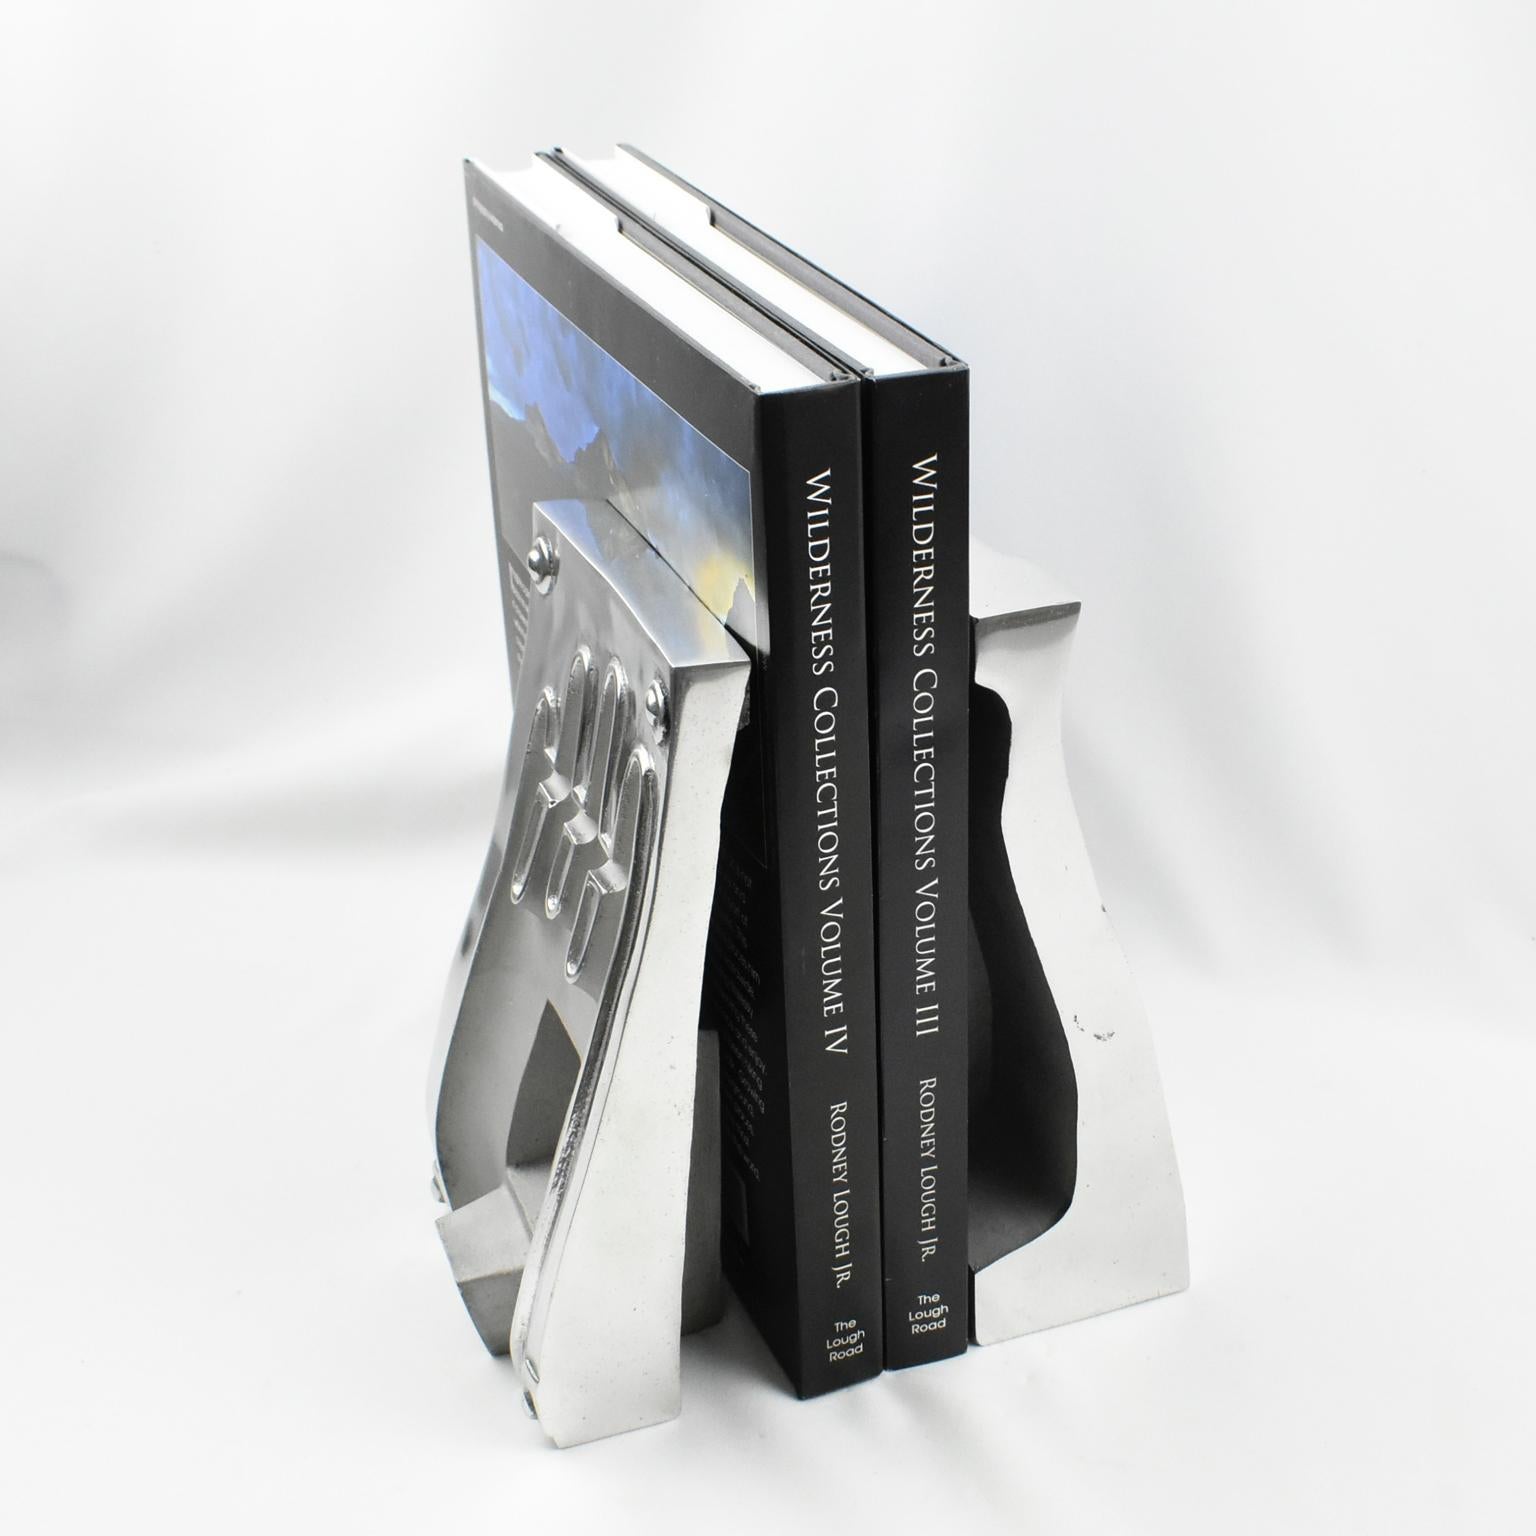 This stunning pair of industrial stainless steel hand or glove molds has their use turned into bookends. Those forms are the female and male parts of a complete mold. They look spectacular as sculptures or bookends on an étagère or a console. The